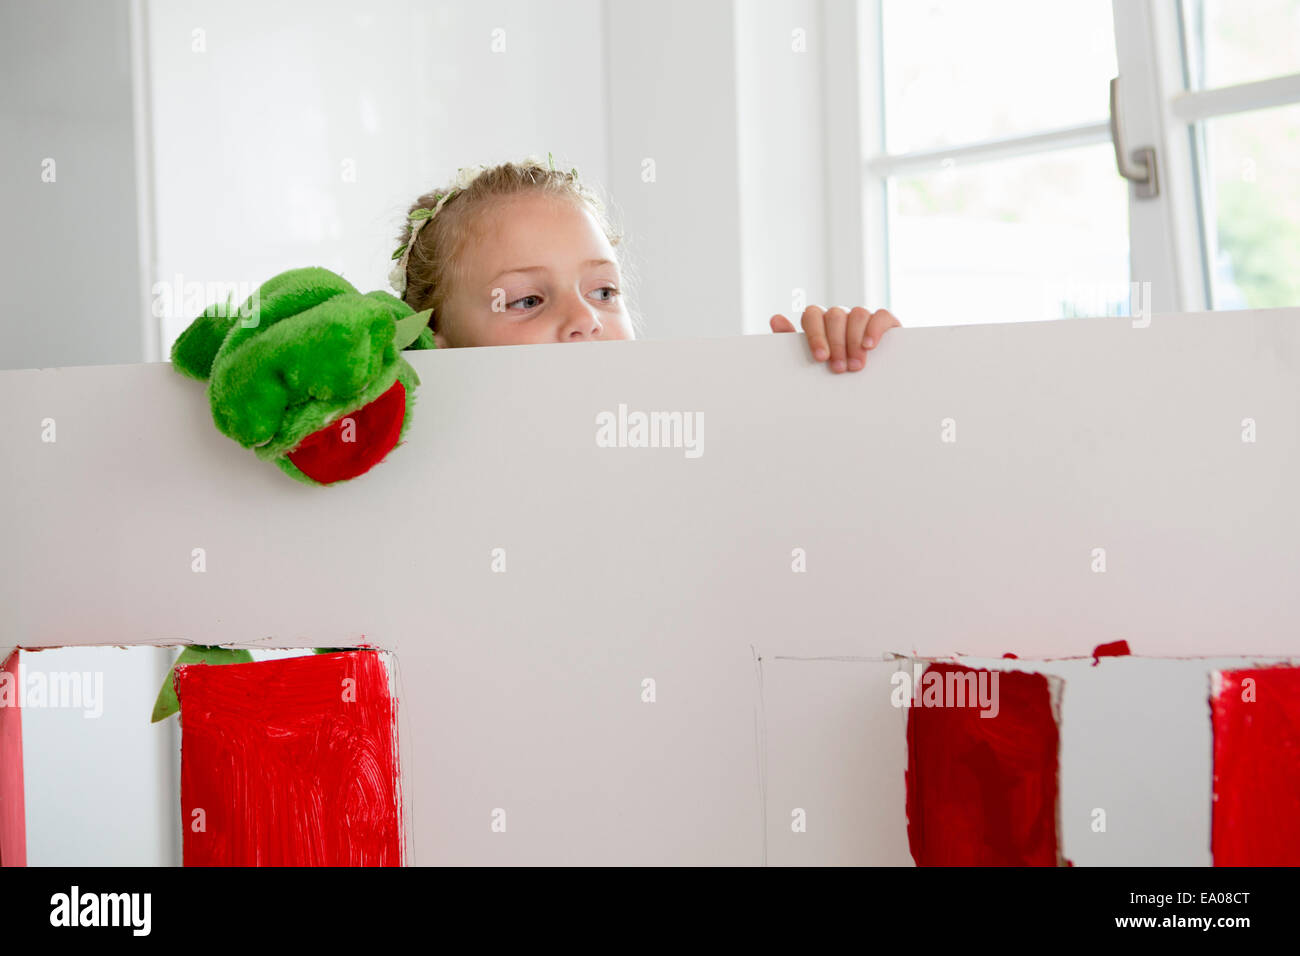 Girl peering over toy theatre with puppet Stock Photo